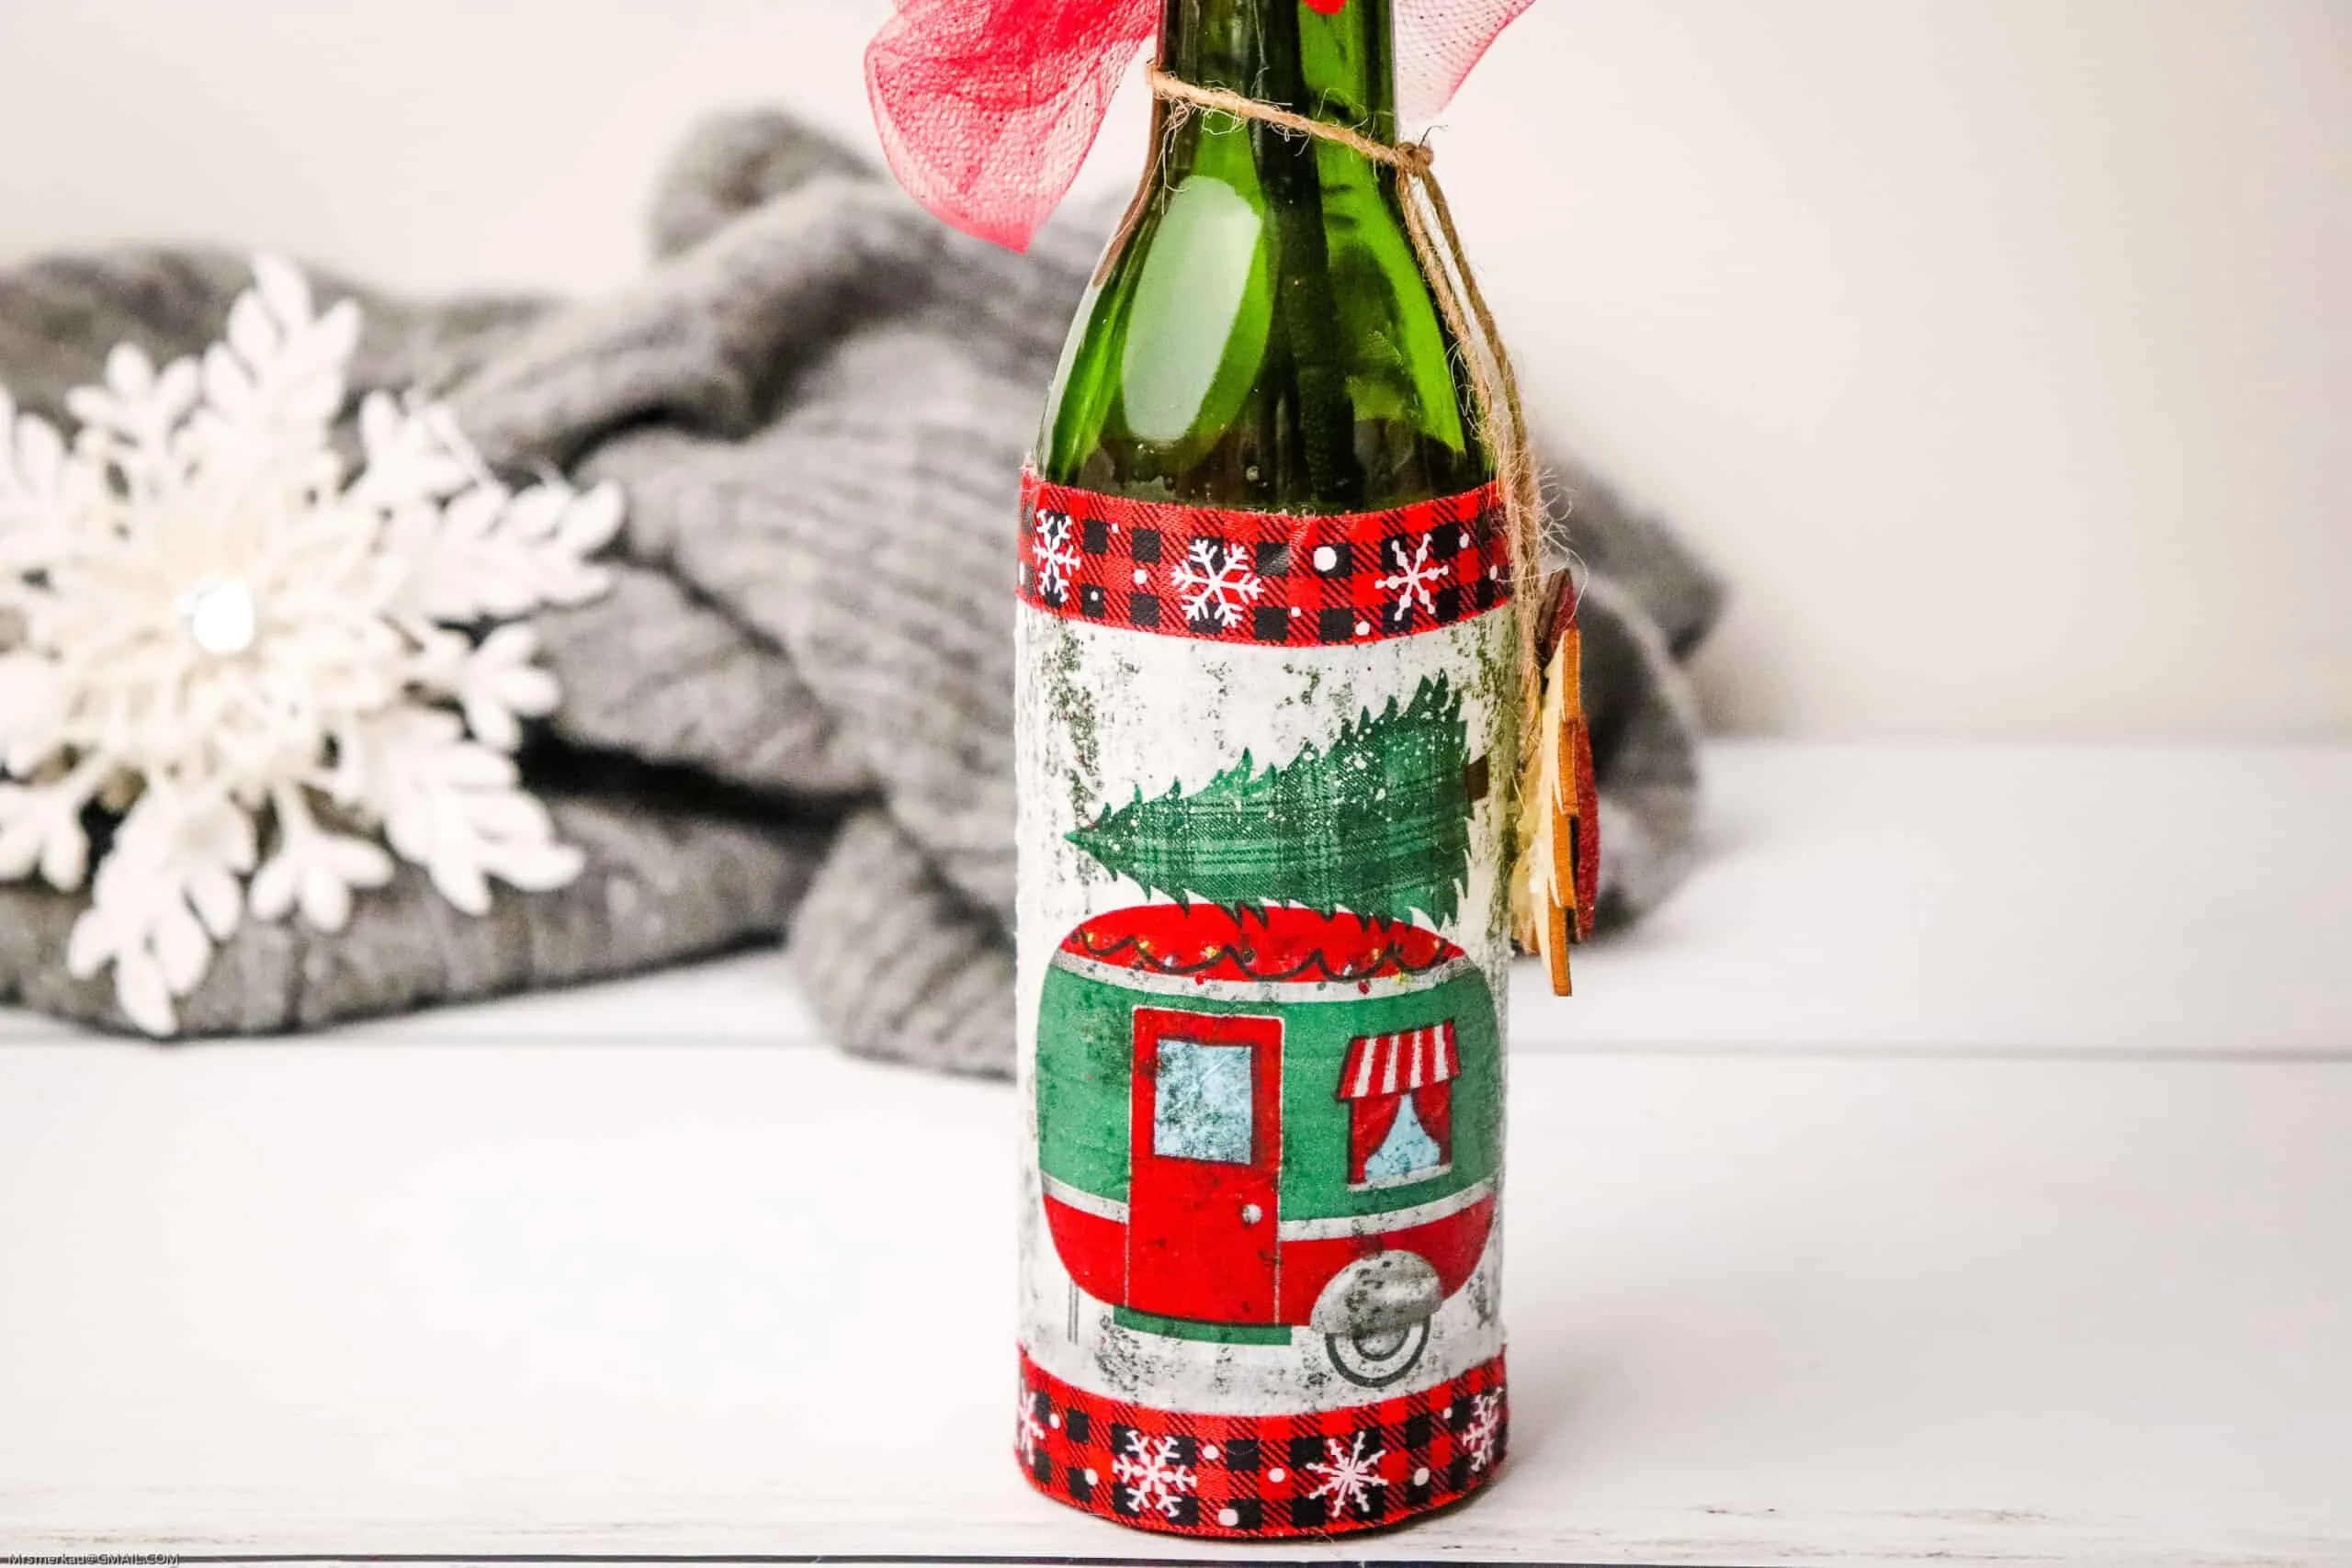 A wine bottle decorated with a Christmas tree on top of a camper. A snowflake decor and gray blanket on the background.